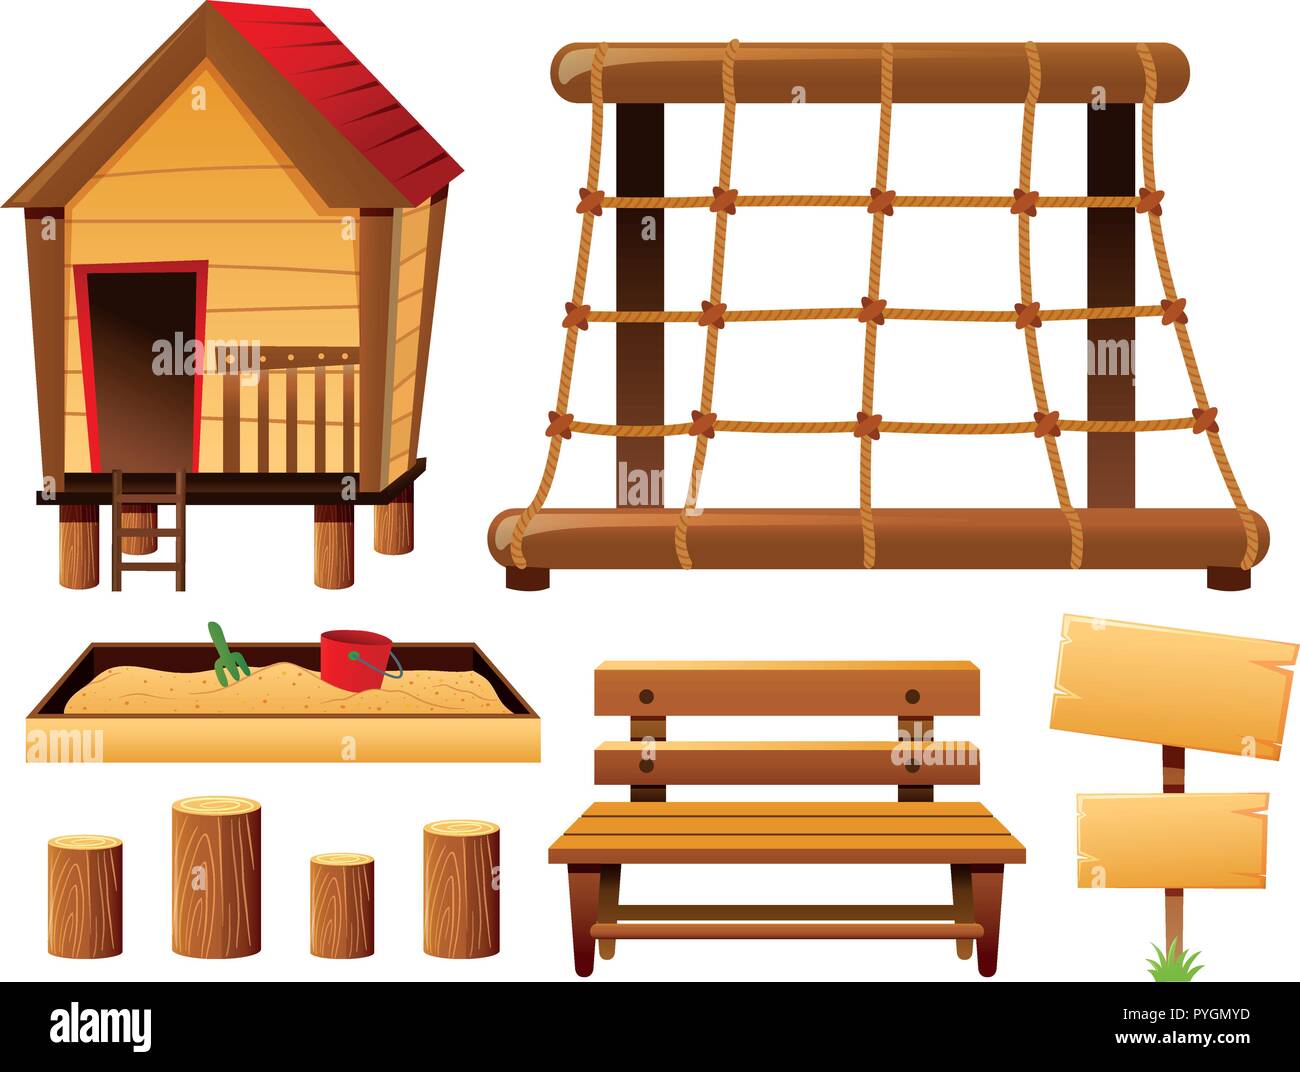 Playground stations with climbing rope and sandpit illustration Stock Vector